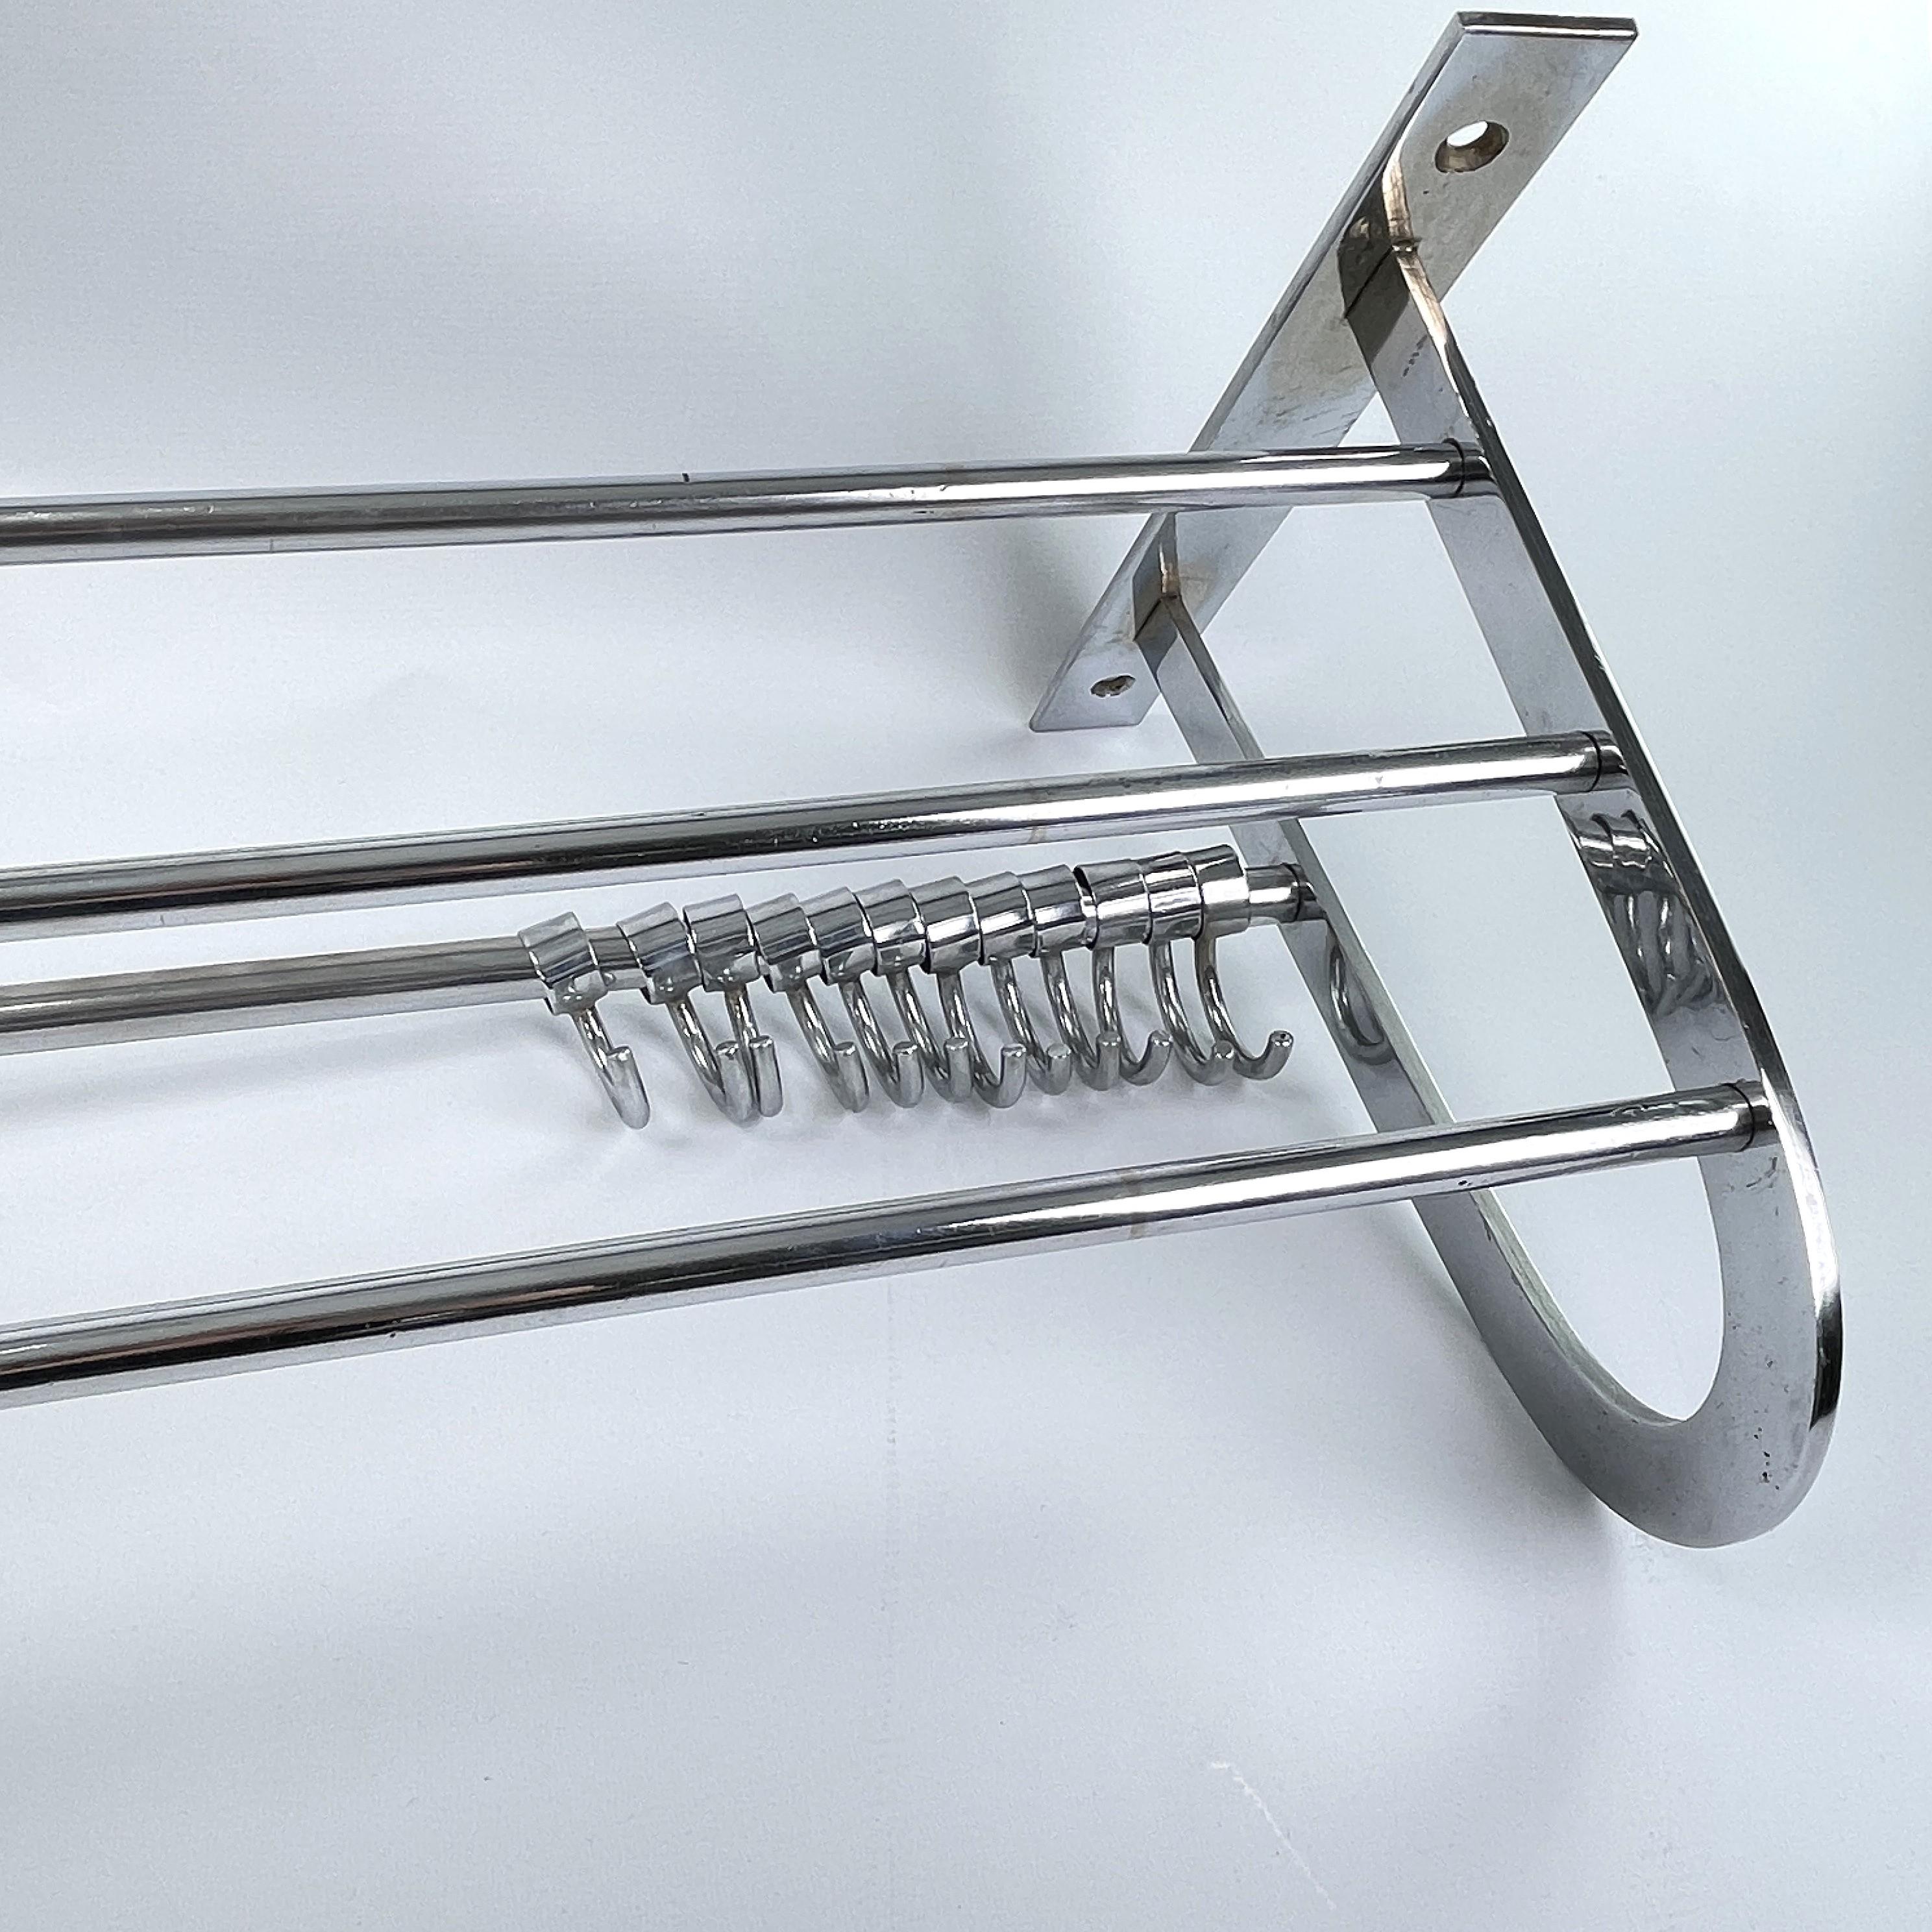 Bauhaus wardrobe chrome - 1930s

This beautiful wall coat rack is from the 1930s. This is a beautiful, timeless and antique piece that will leave a lasting impression.
Fits well in almost any style of interior.

This cleaned coat rack has 12 movable